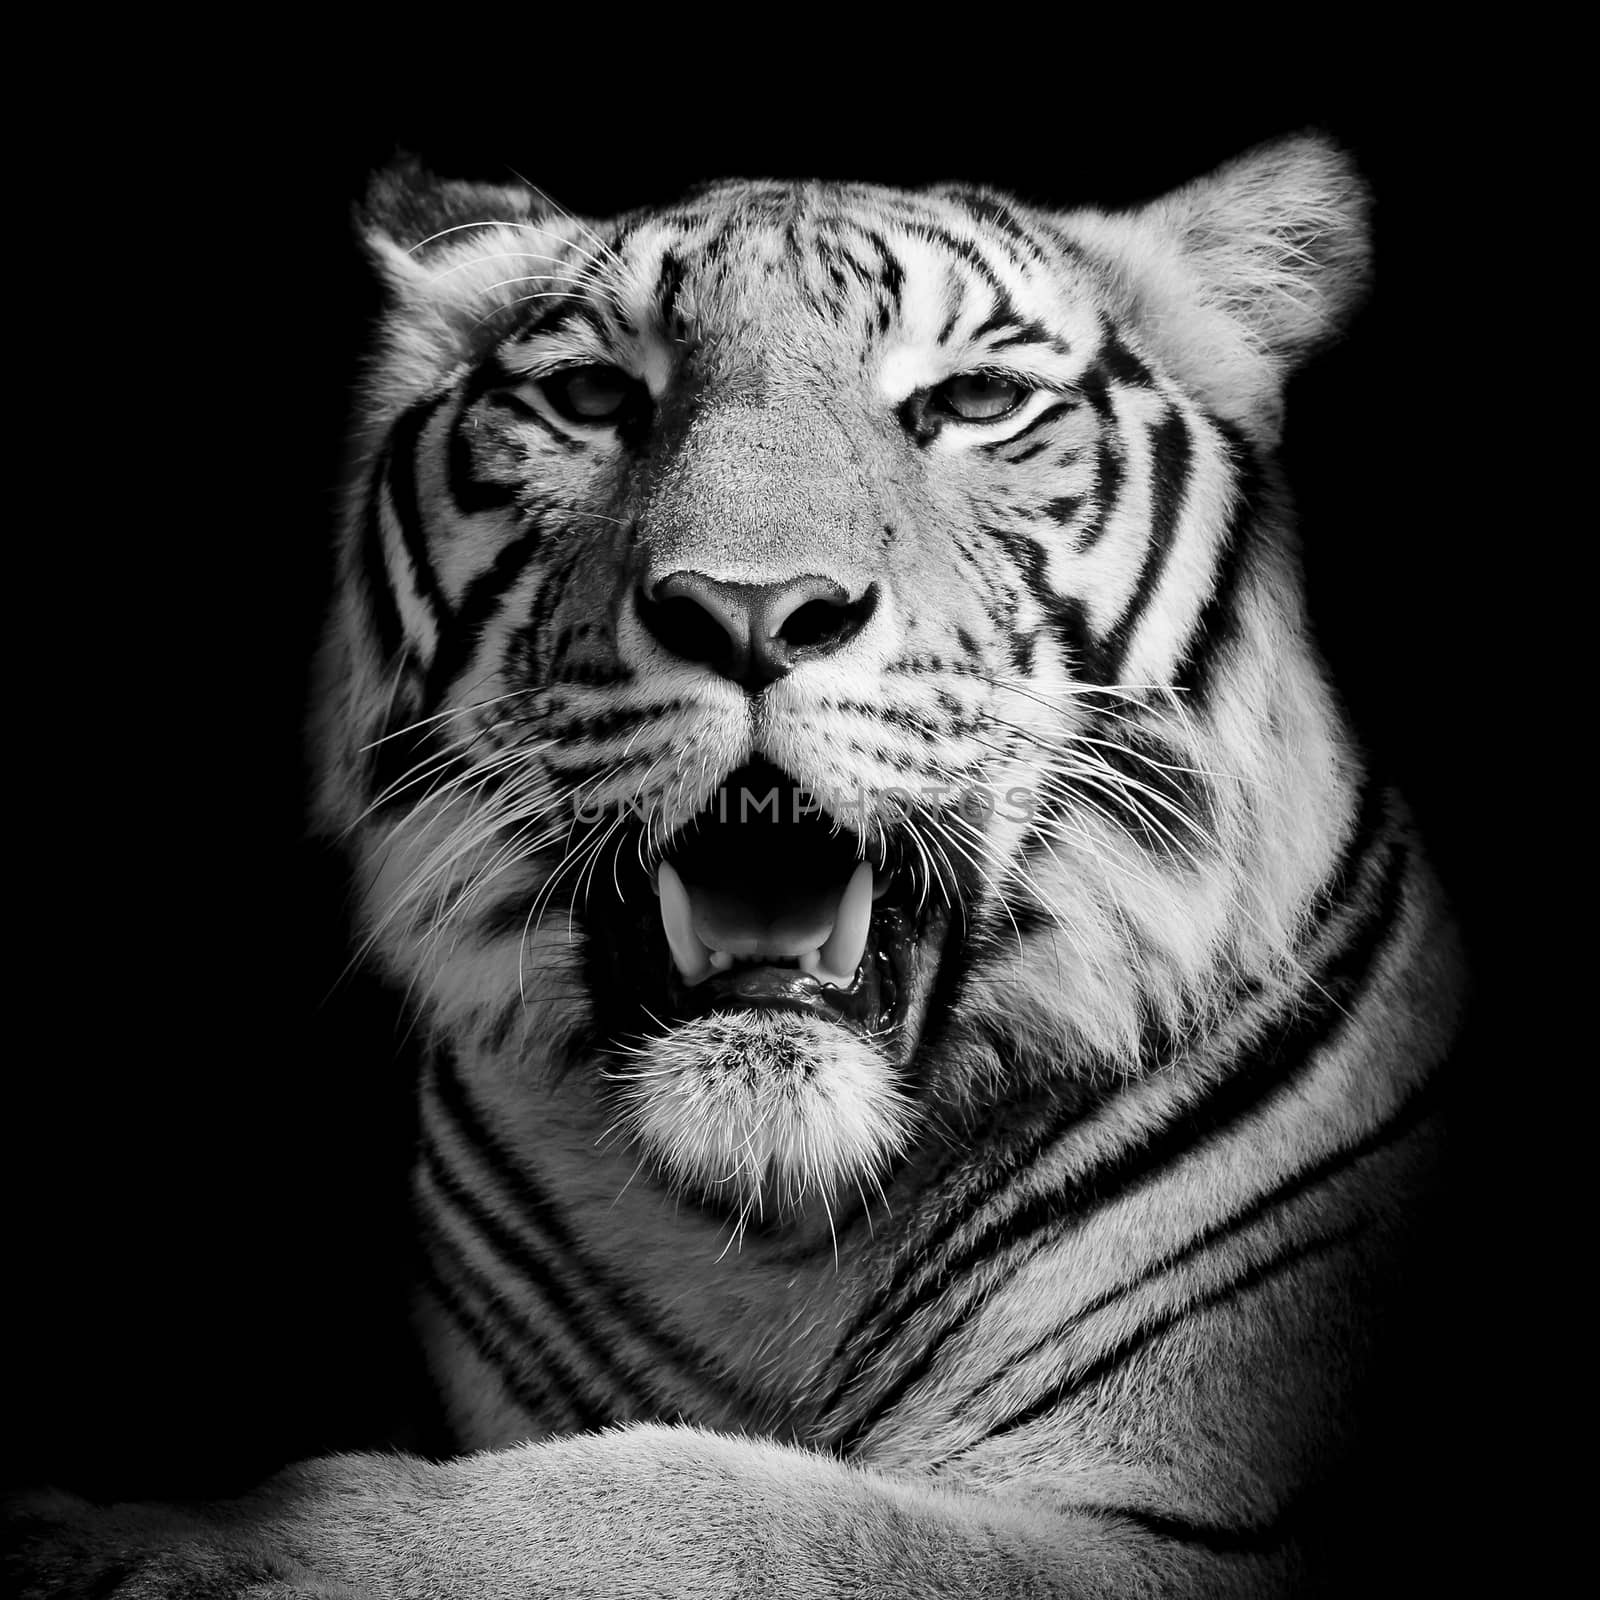 Tiger, portrait of a bengal tiger. by art9858